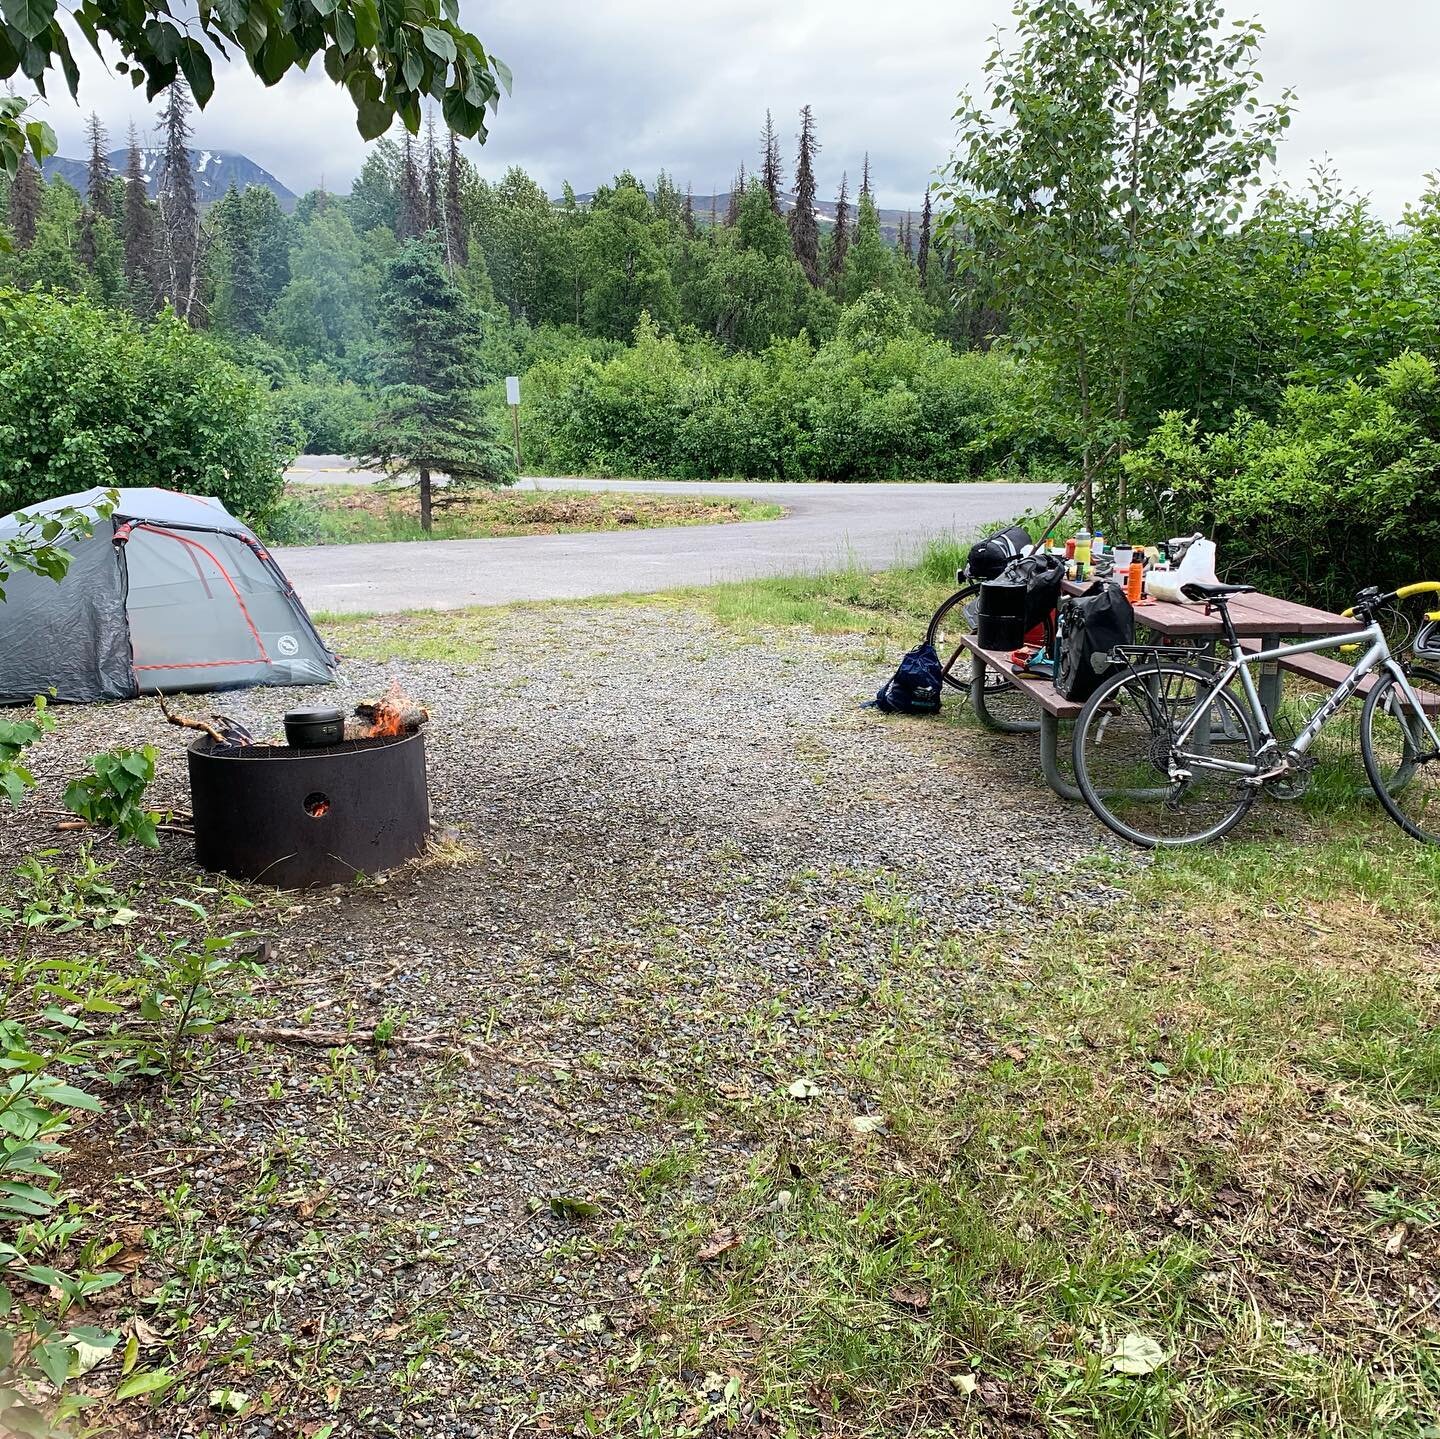 Alaska day 6
From Byers creek to Denali view north. About 20 miles
🚴🏻&zwj;♀️
The ride was easy enough, but when we got to the campsite we discovered that we had almost no cell service, no water, and no view of Denali. We made the best of it and too